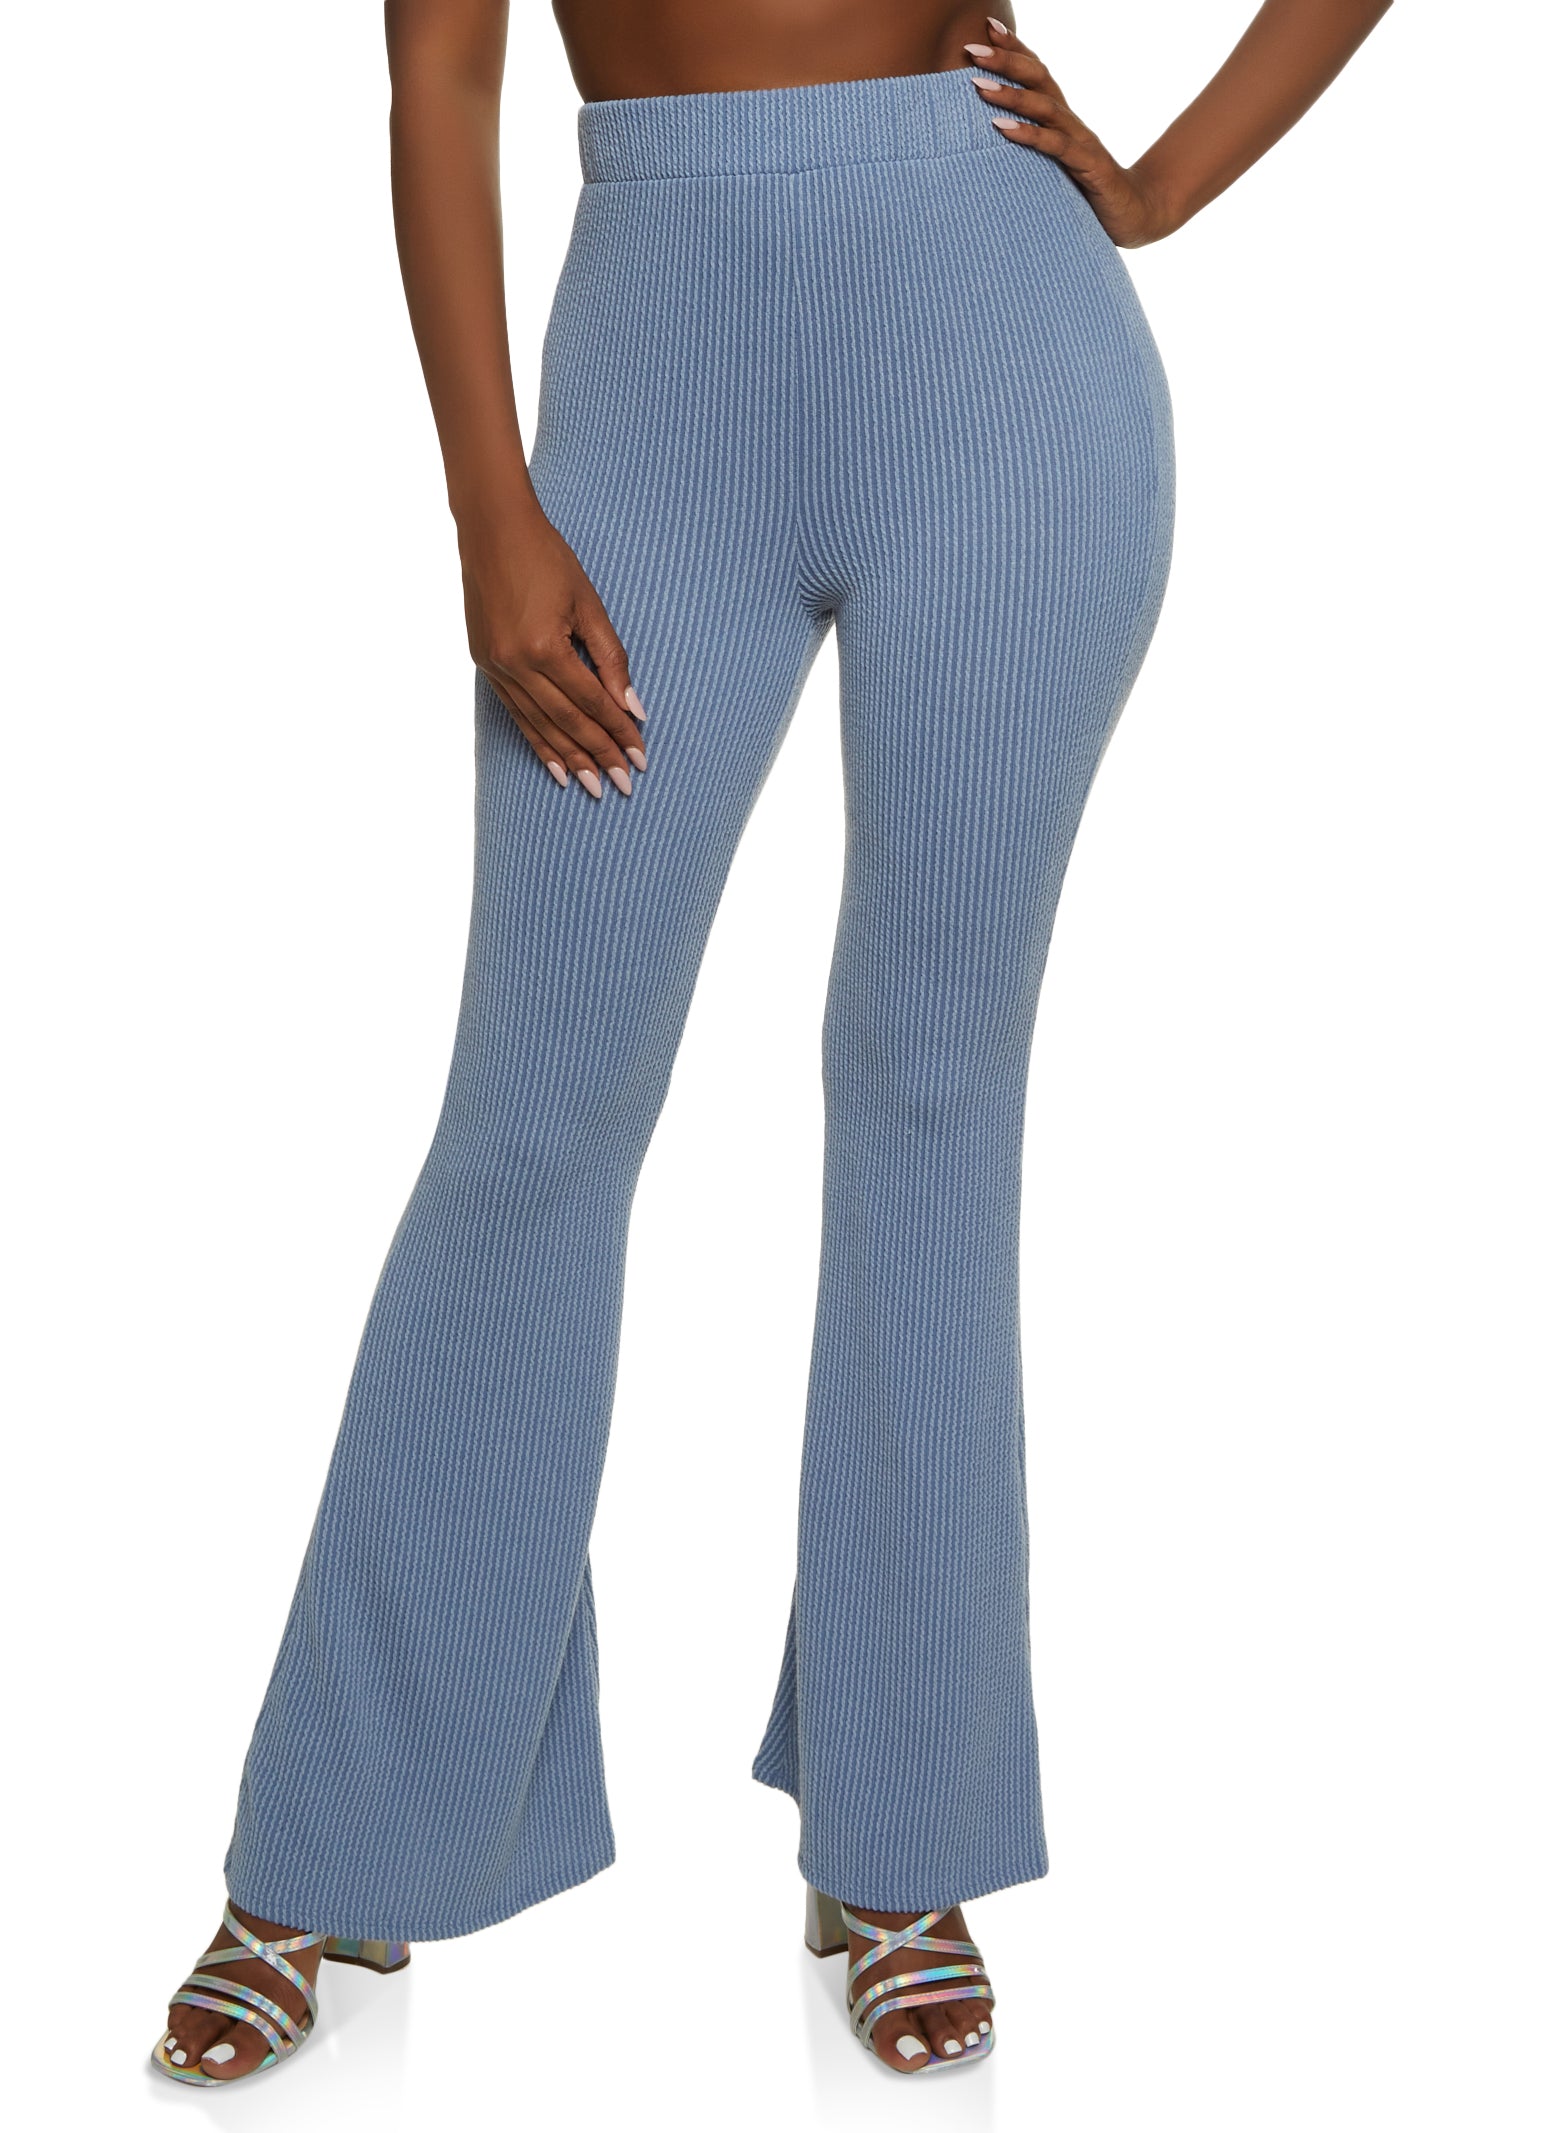 Ribbed High Waisted Flare Pants